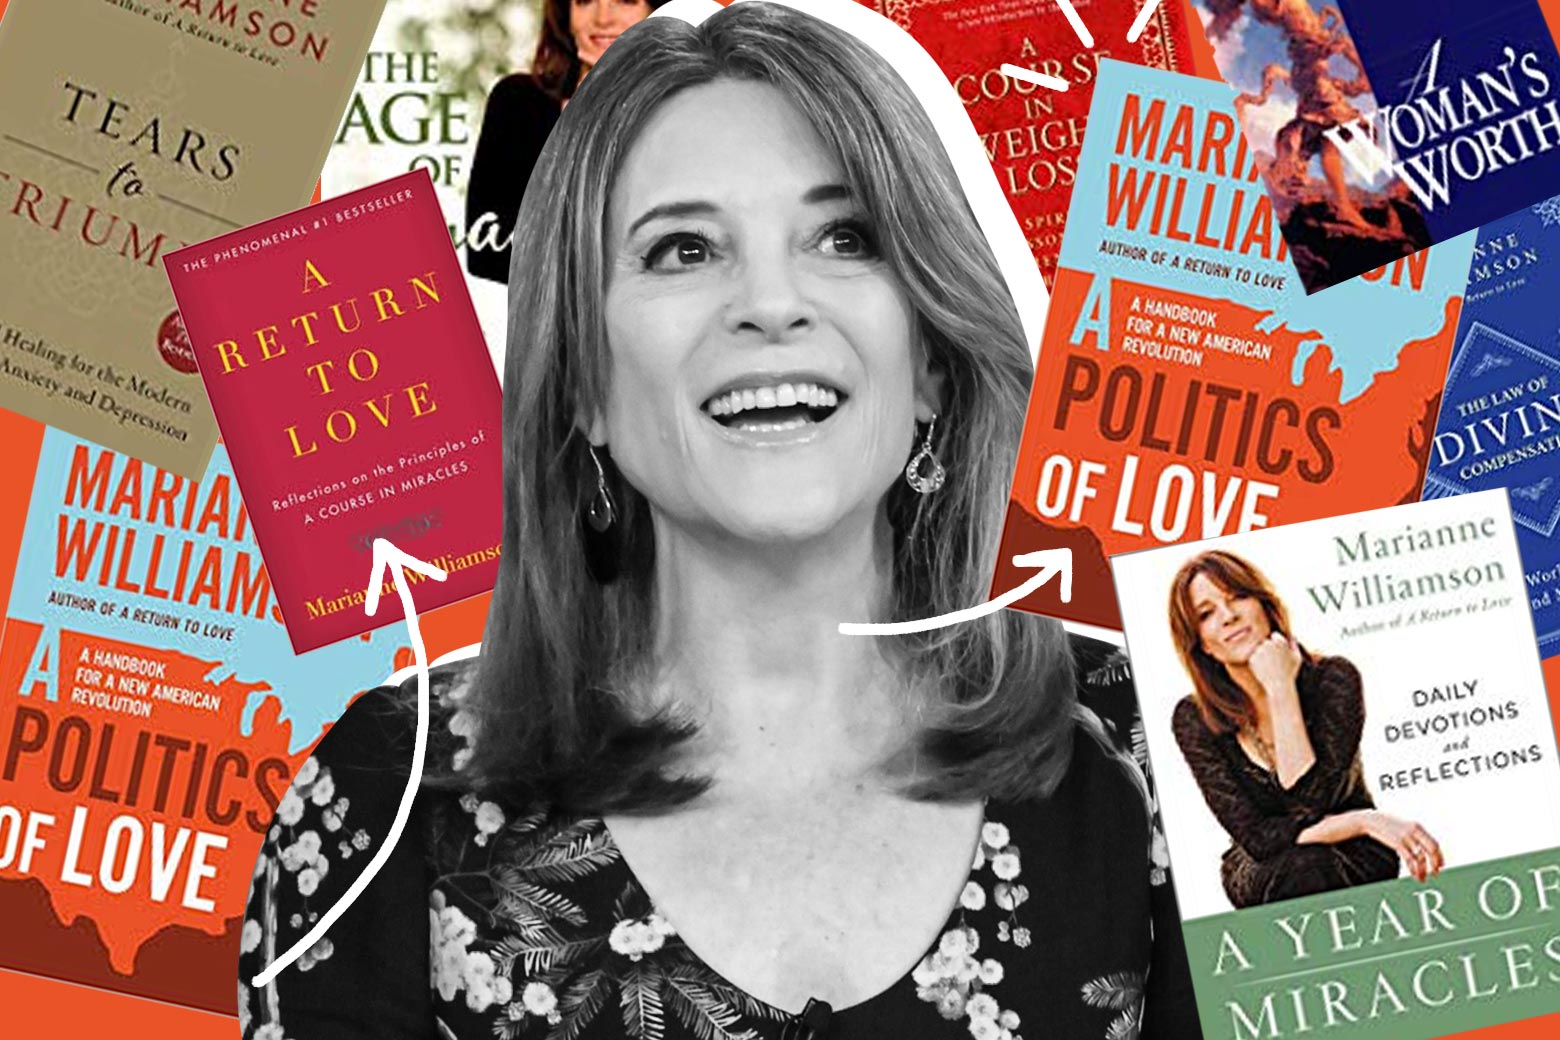 Marianne Williamson, surrounded by her books.